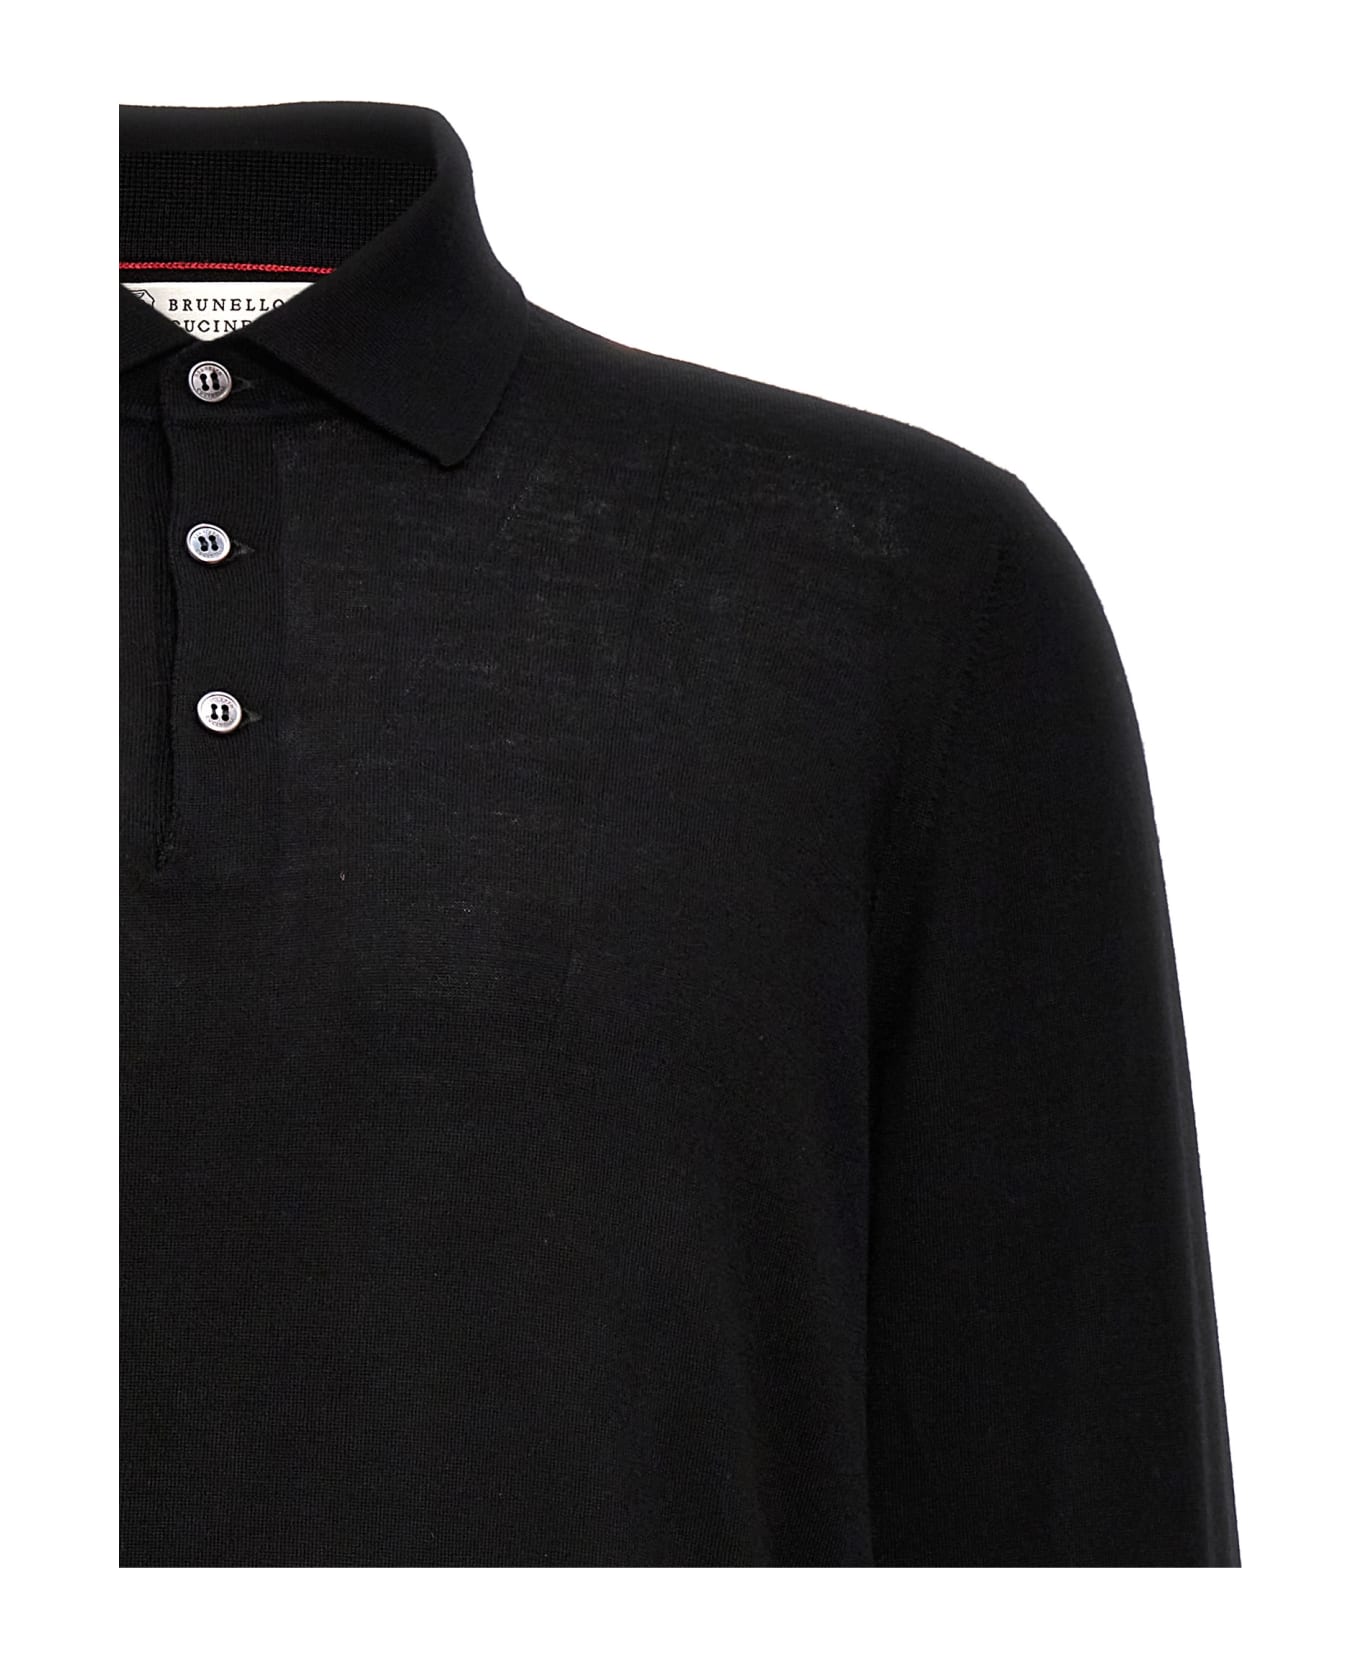 Brunello Cucinelli Knitted Polo Shirt - Black ポロシャツ